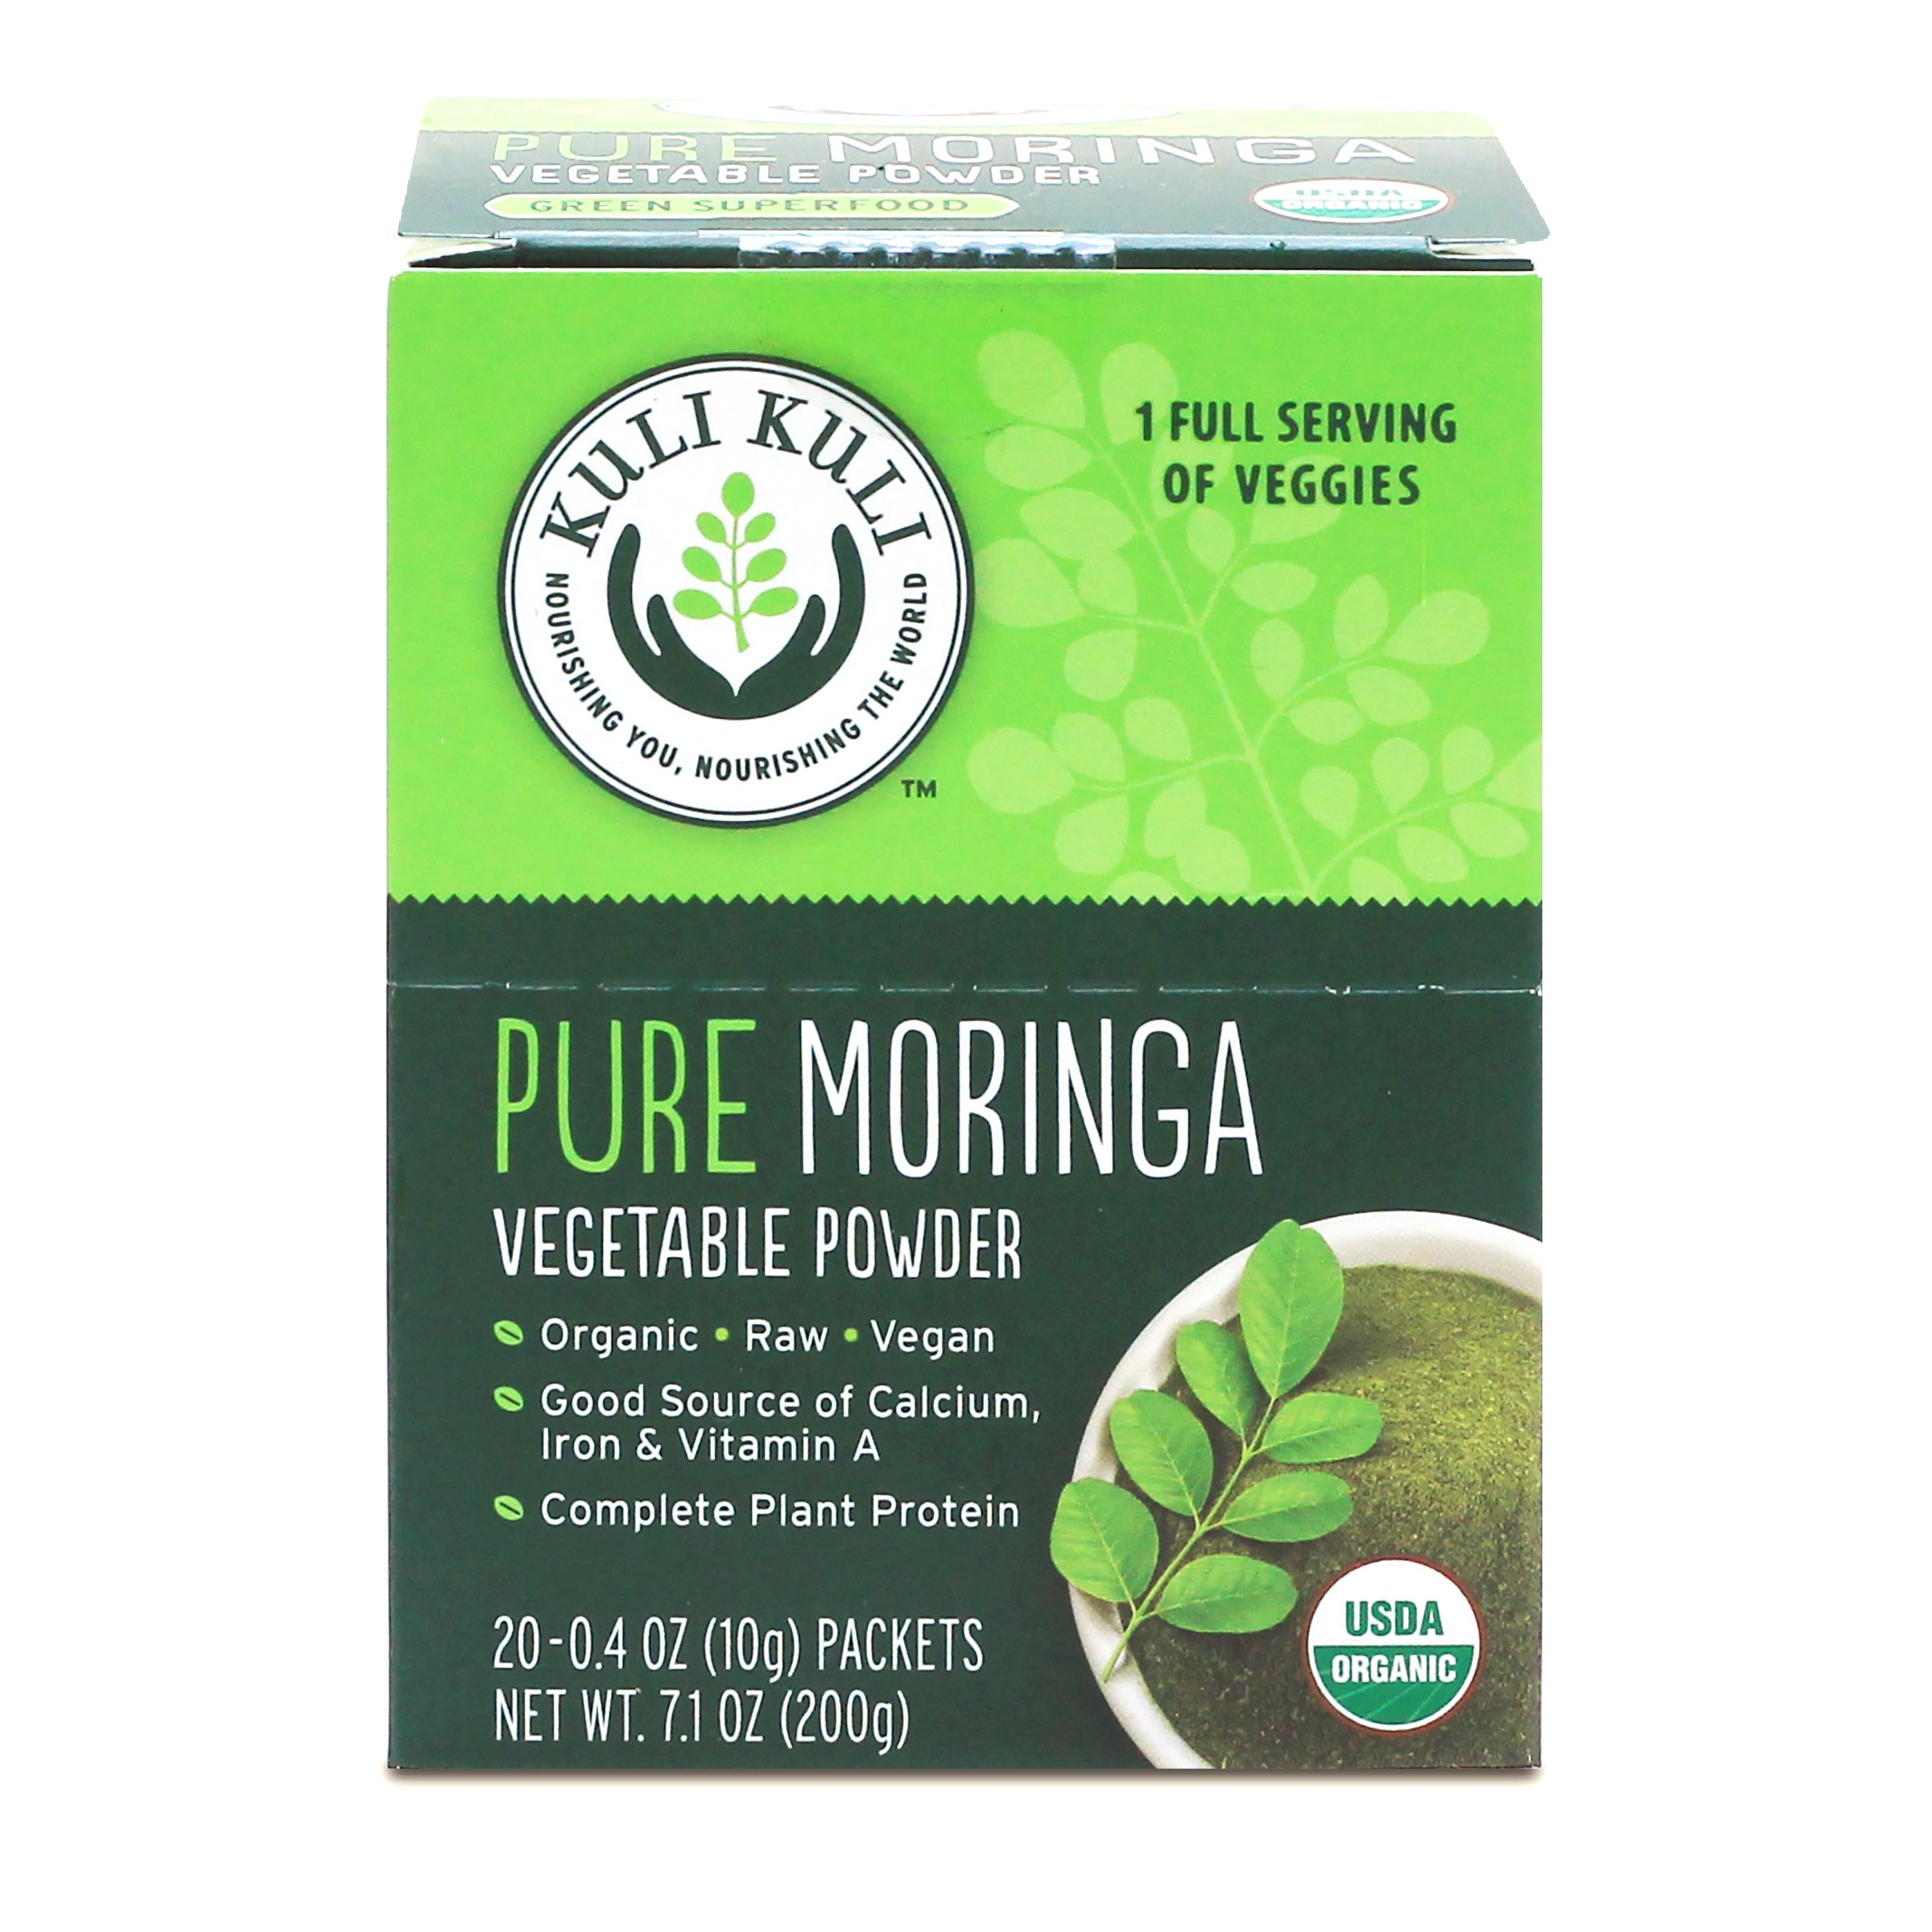 Kuli Kuli Pure Moringa Organic Vegetable Powder, 20 Single Serve Packets (Pack of 12) Organic, Raw, Vegan, 3g Complete Plant Protein and 1 Full Serving of Veggies Per Packet, Soy and Gluten-Free